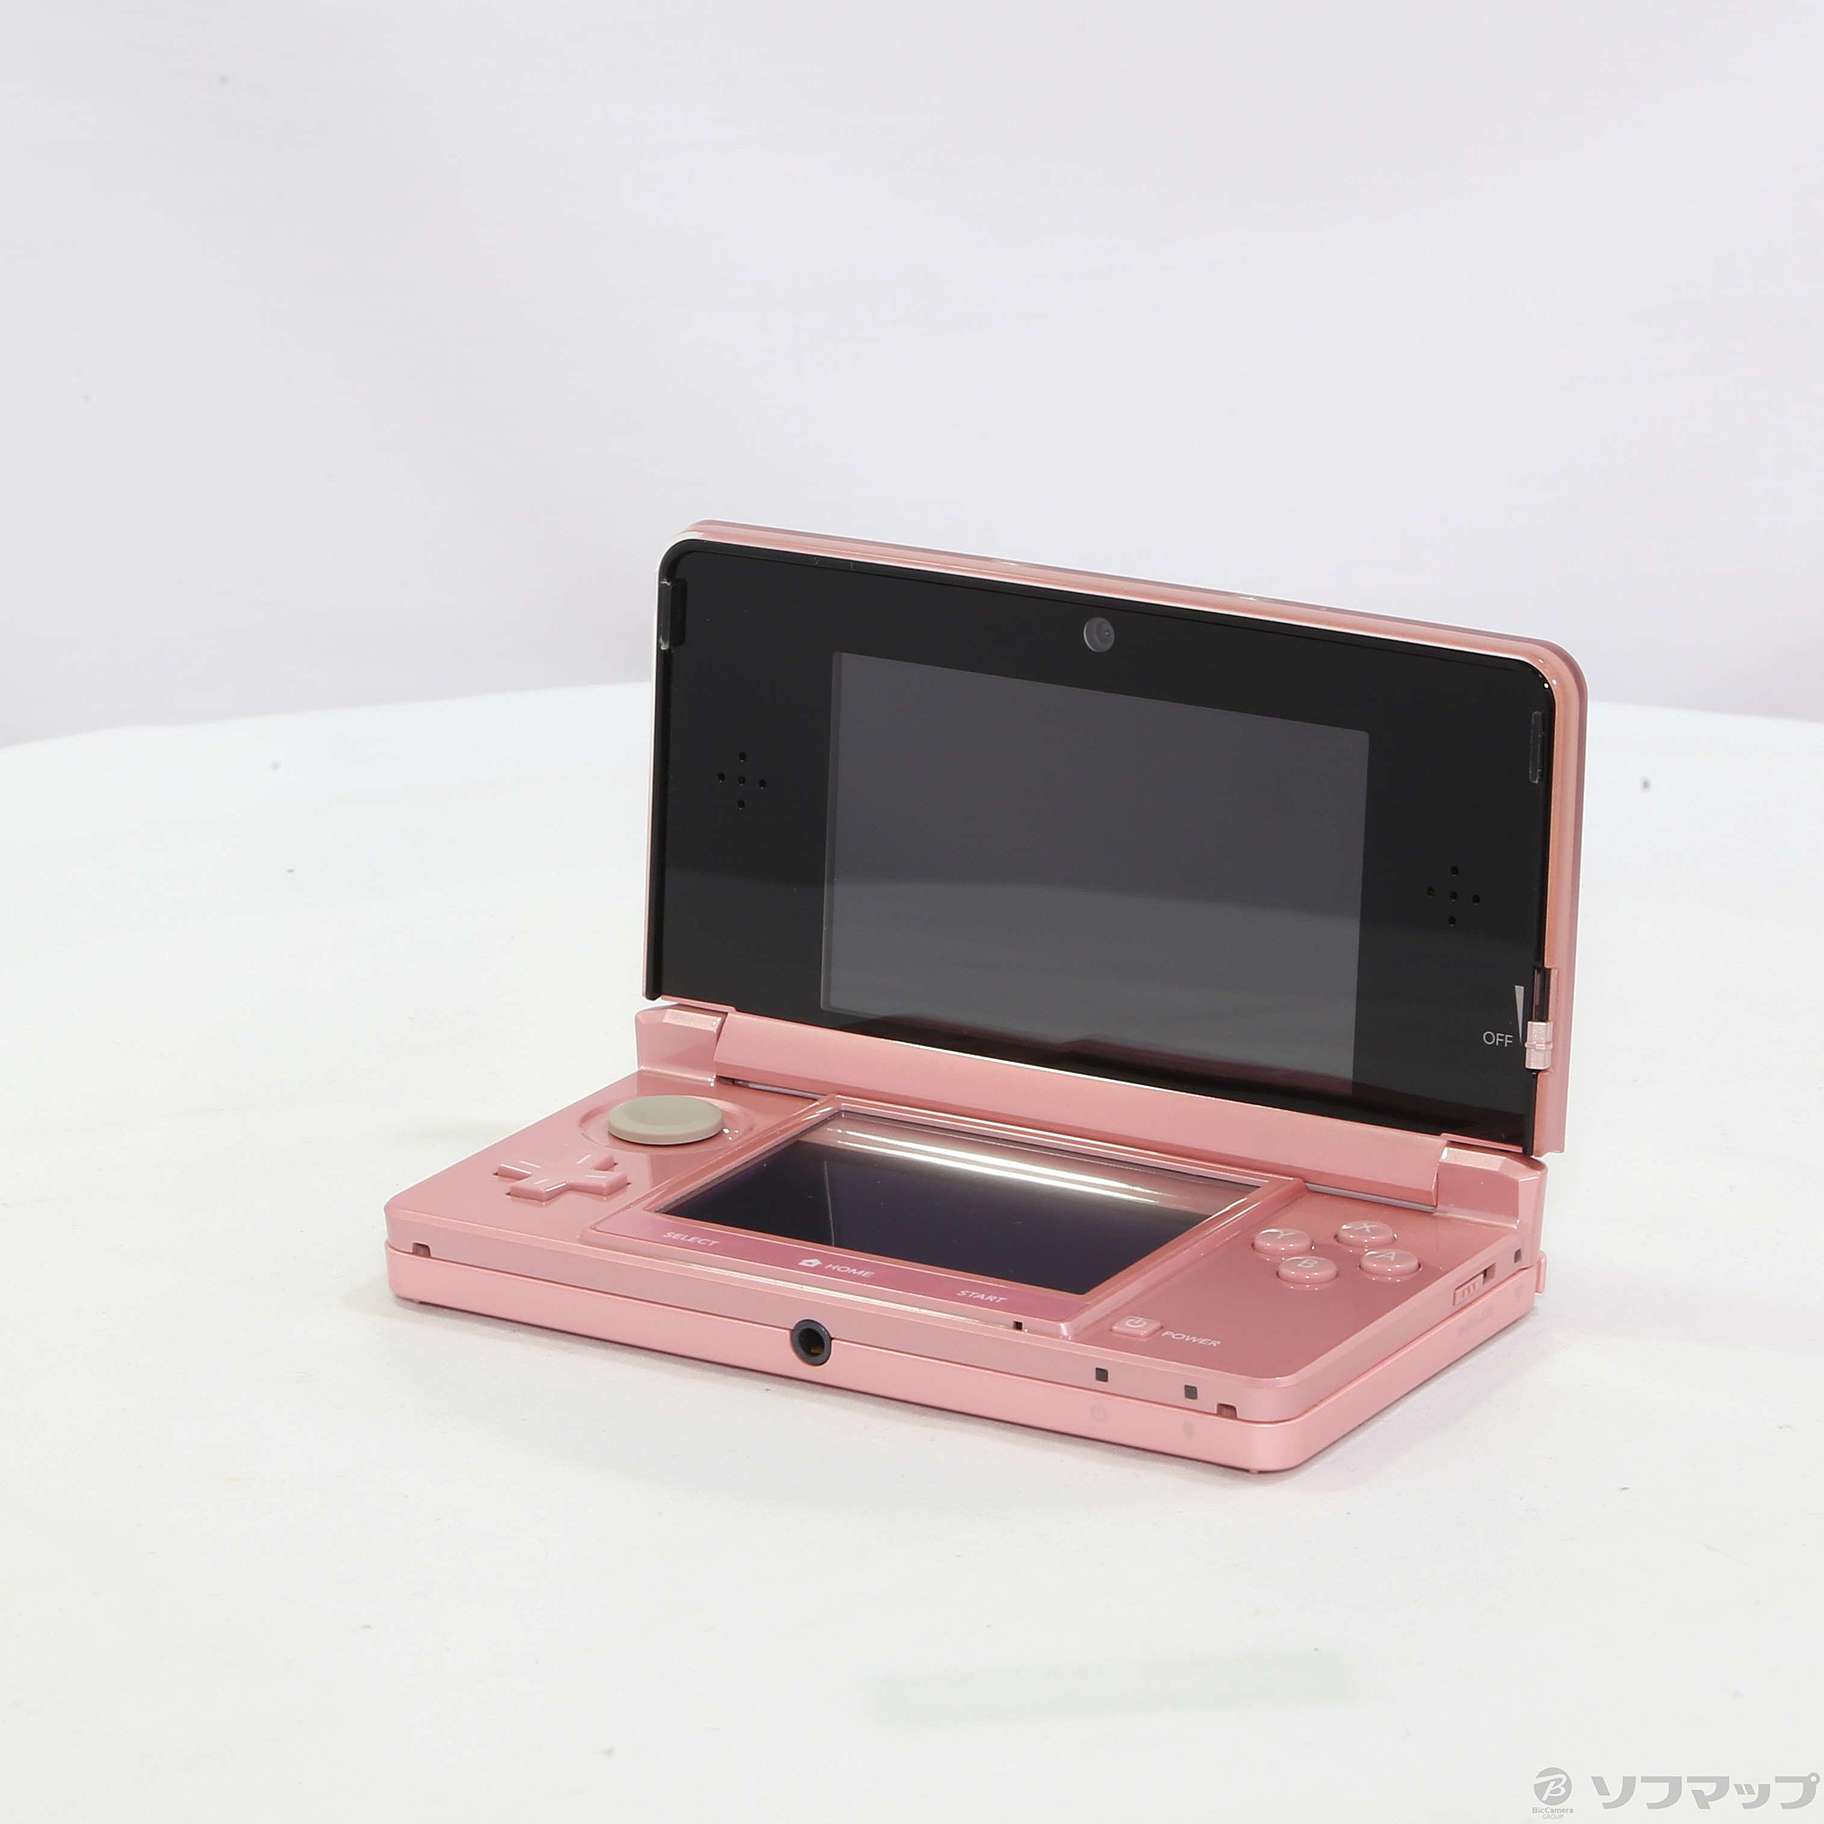 3DS ピンク